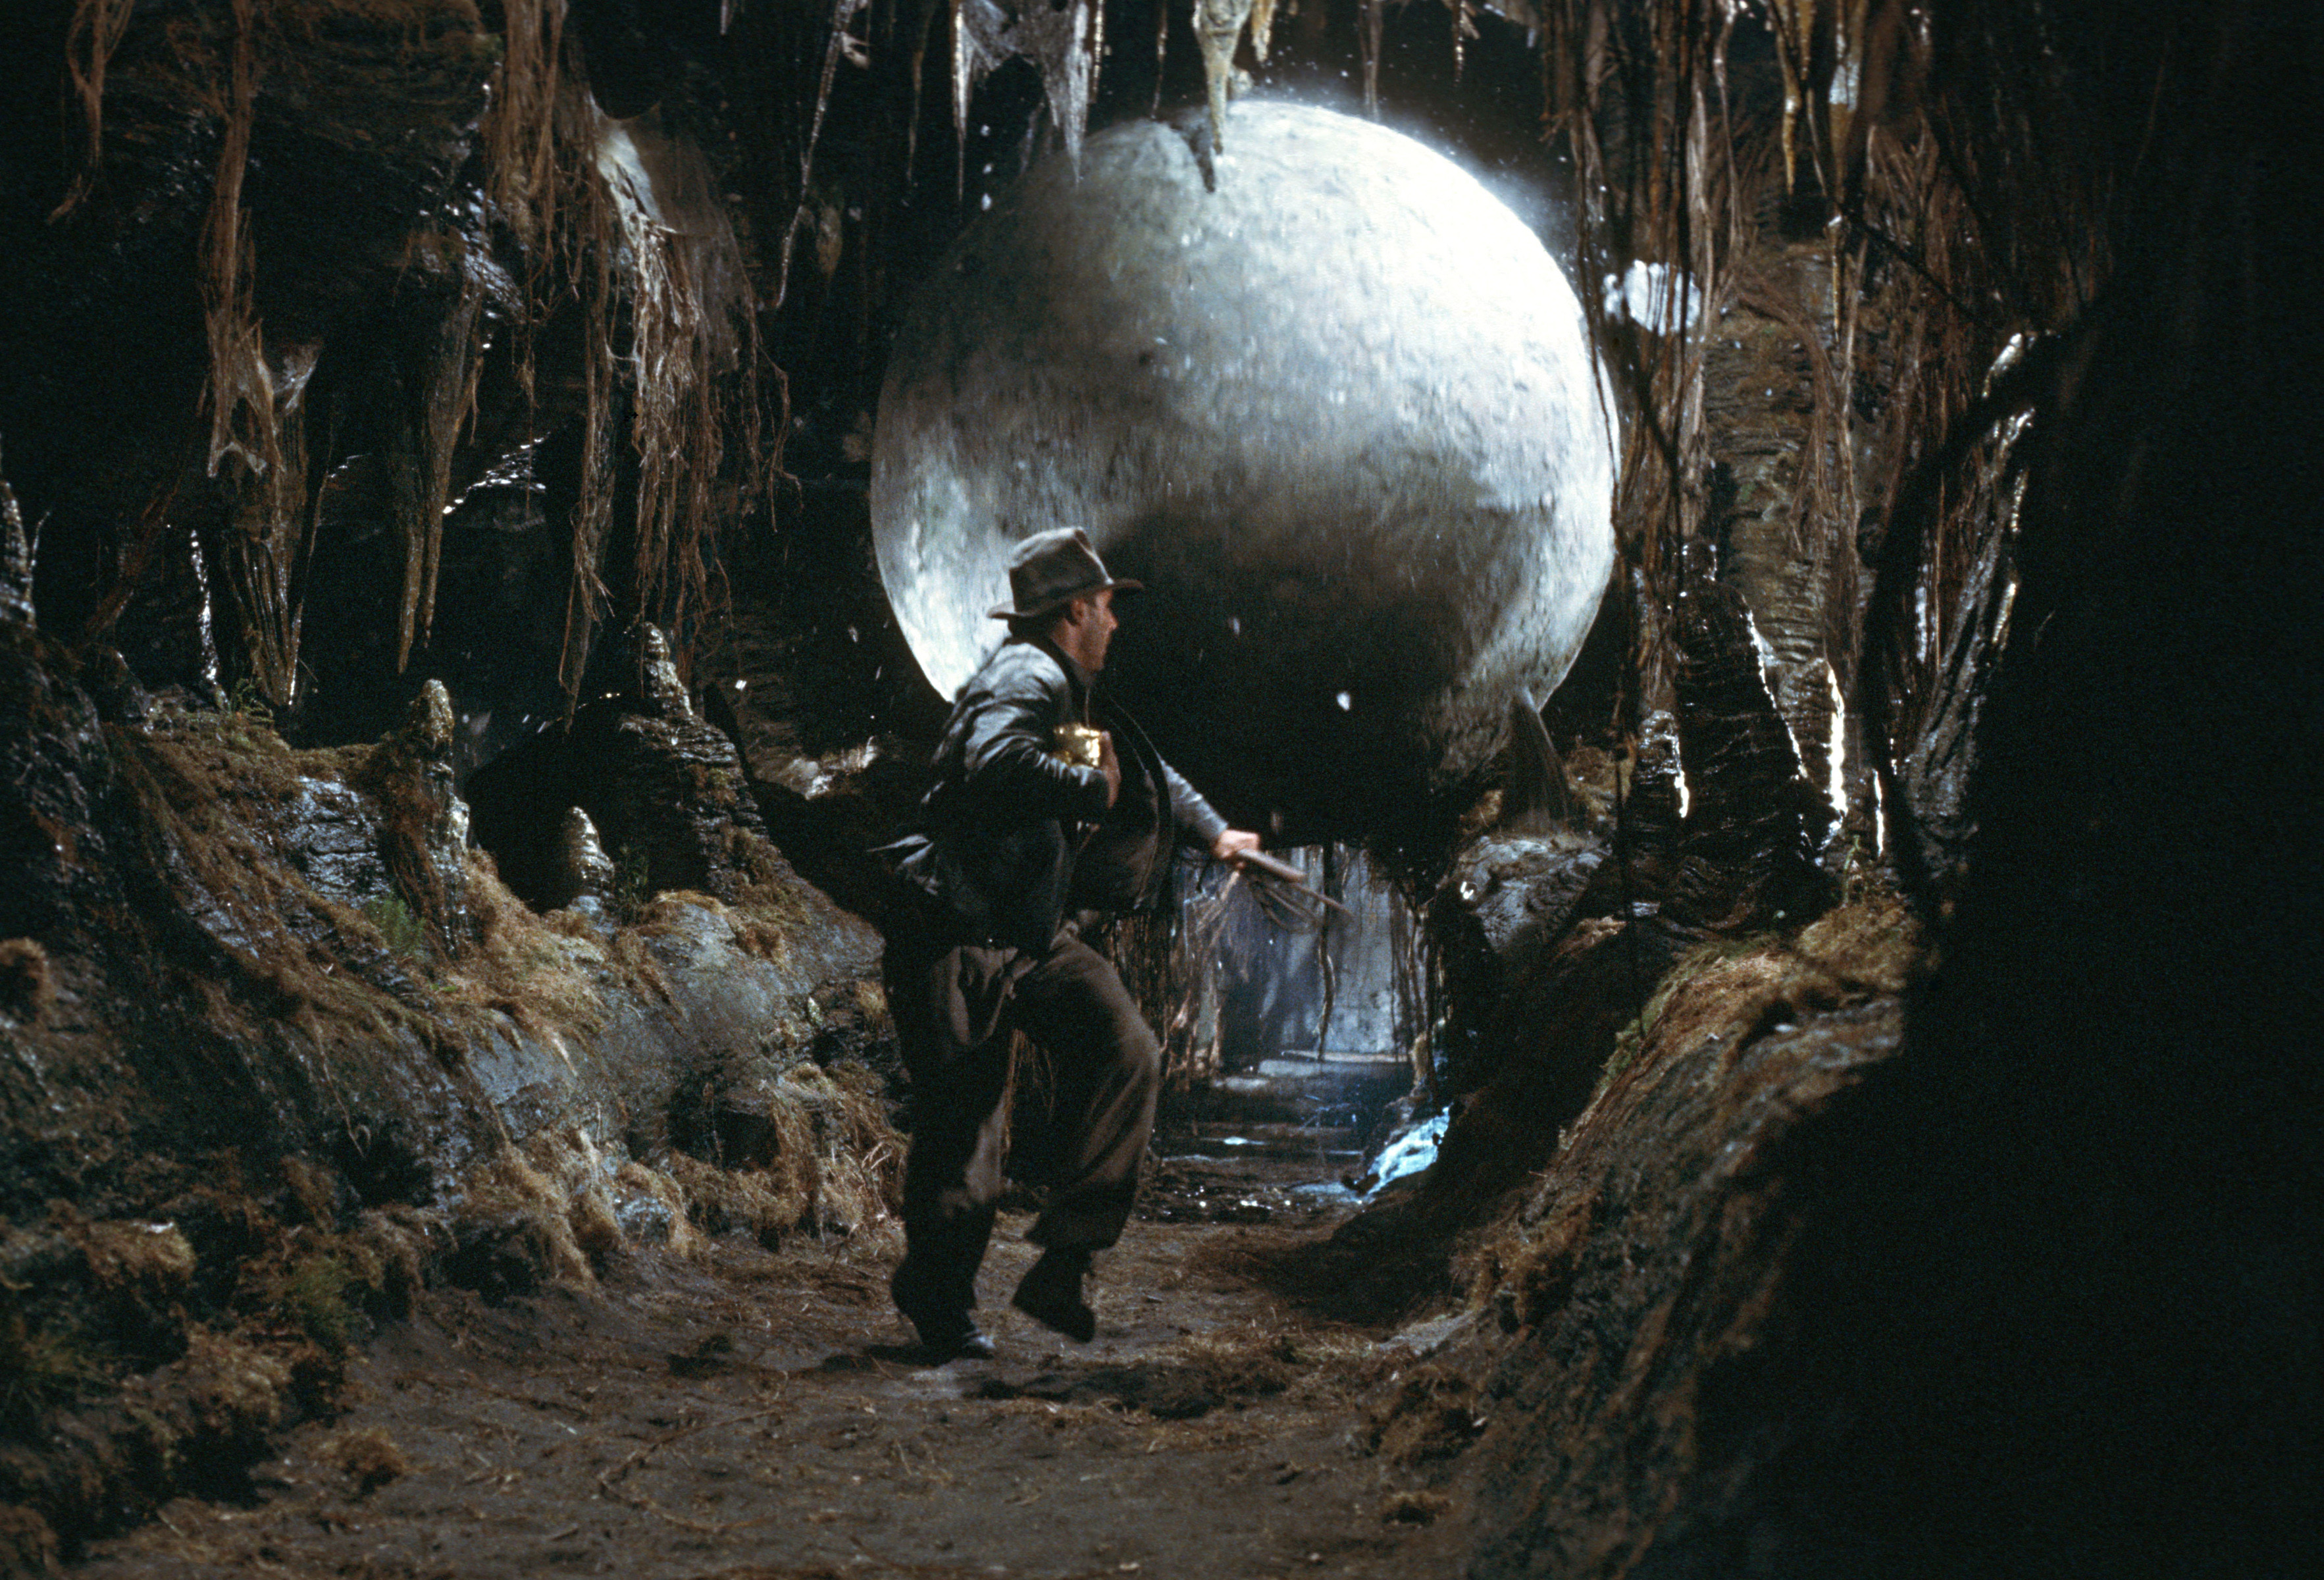 The giant boulder that chases Indy at the beginning of the film was made of fiberglass.